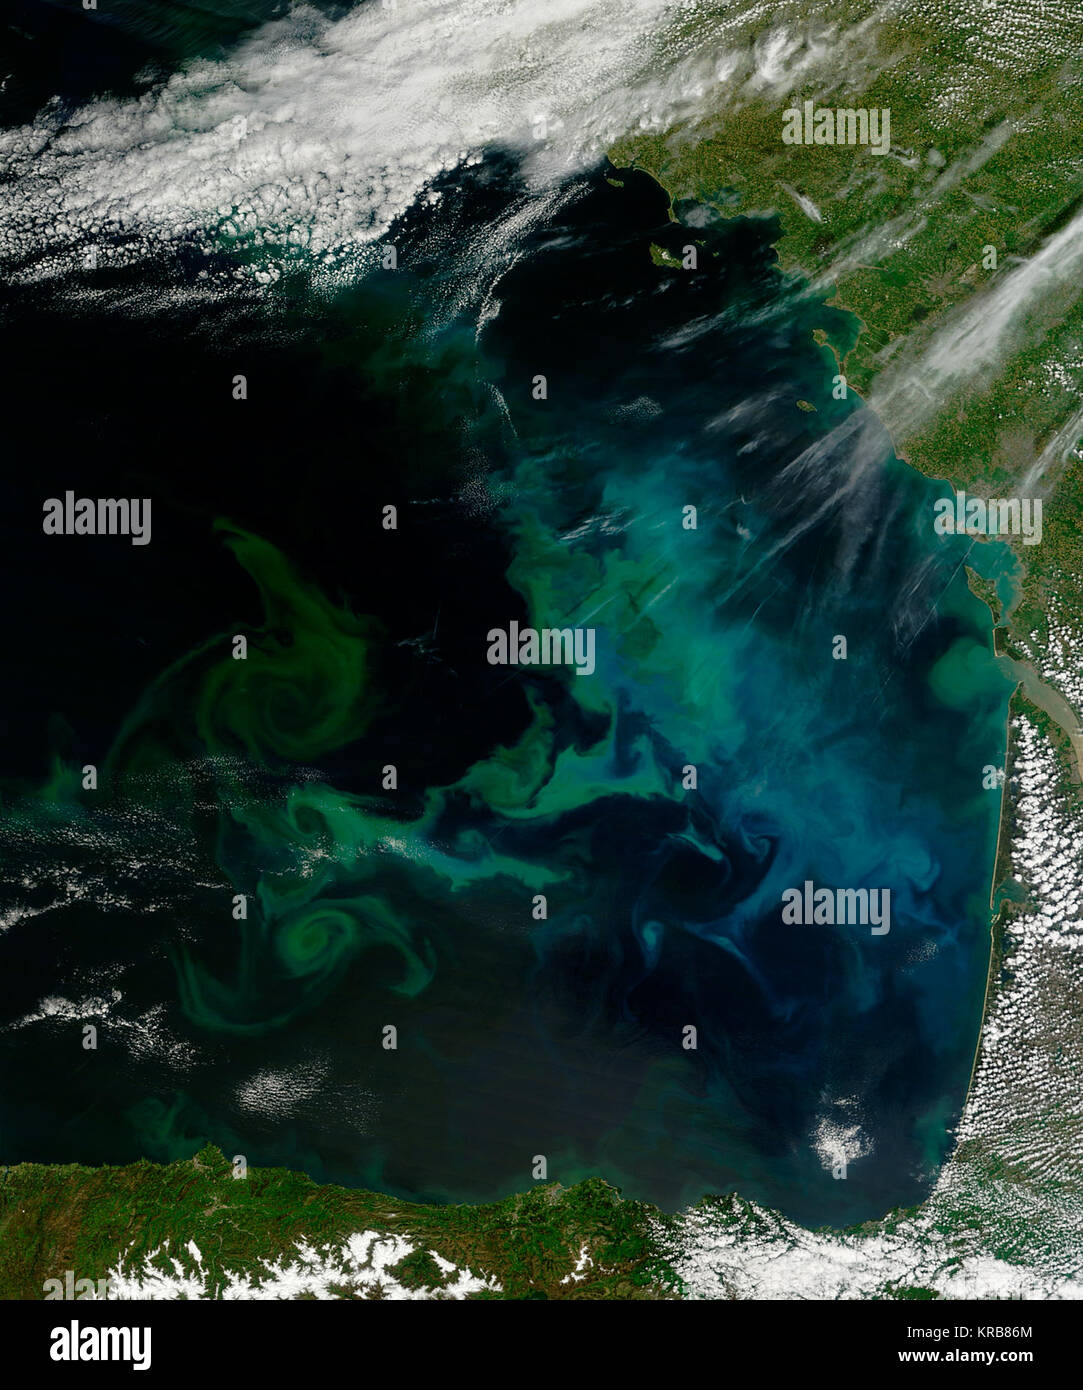 Swirls in the Waters off France  Springtime  brought a substantial and long-lasting bloom of phytoplankton in the Bay of Biscay, off the western coast of France. Swirls of green, turquoise, and cyan on the water surface show the location of these microscopic, plant-like organisms, while also tracing the currents and eddies that mix them.  NASA satellite captured this natural-color image of a phytoplankton-filled Bay of Biscay in the spring of 2013. The Moderate Resolution Imaging Spectroradiometer (MODIS) on the Terra satellite captured the top image on May 4.  Read more, high res: http://eart Stock Photo